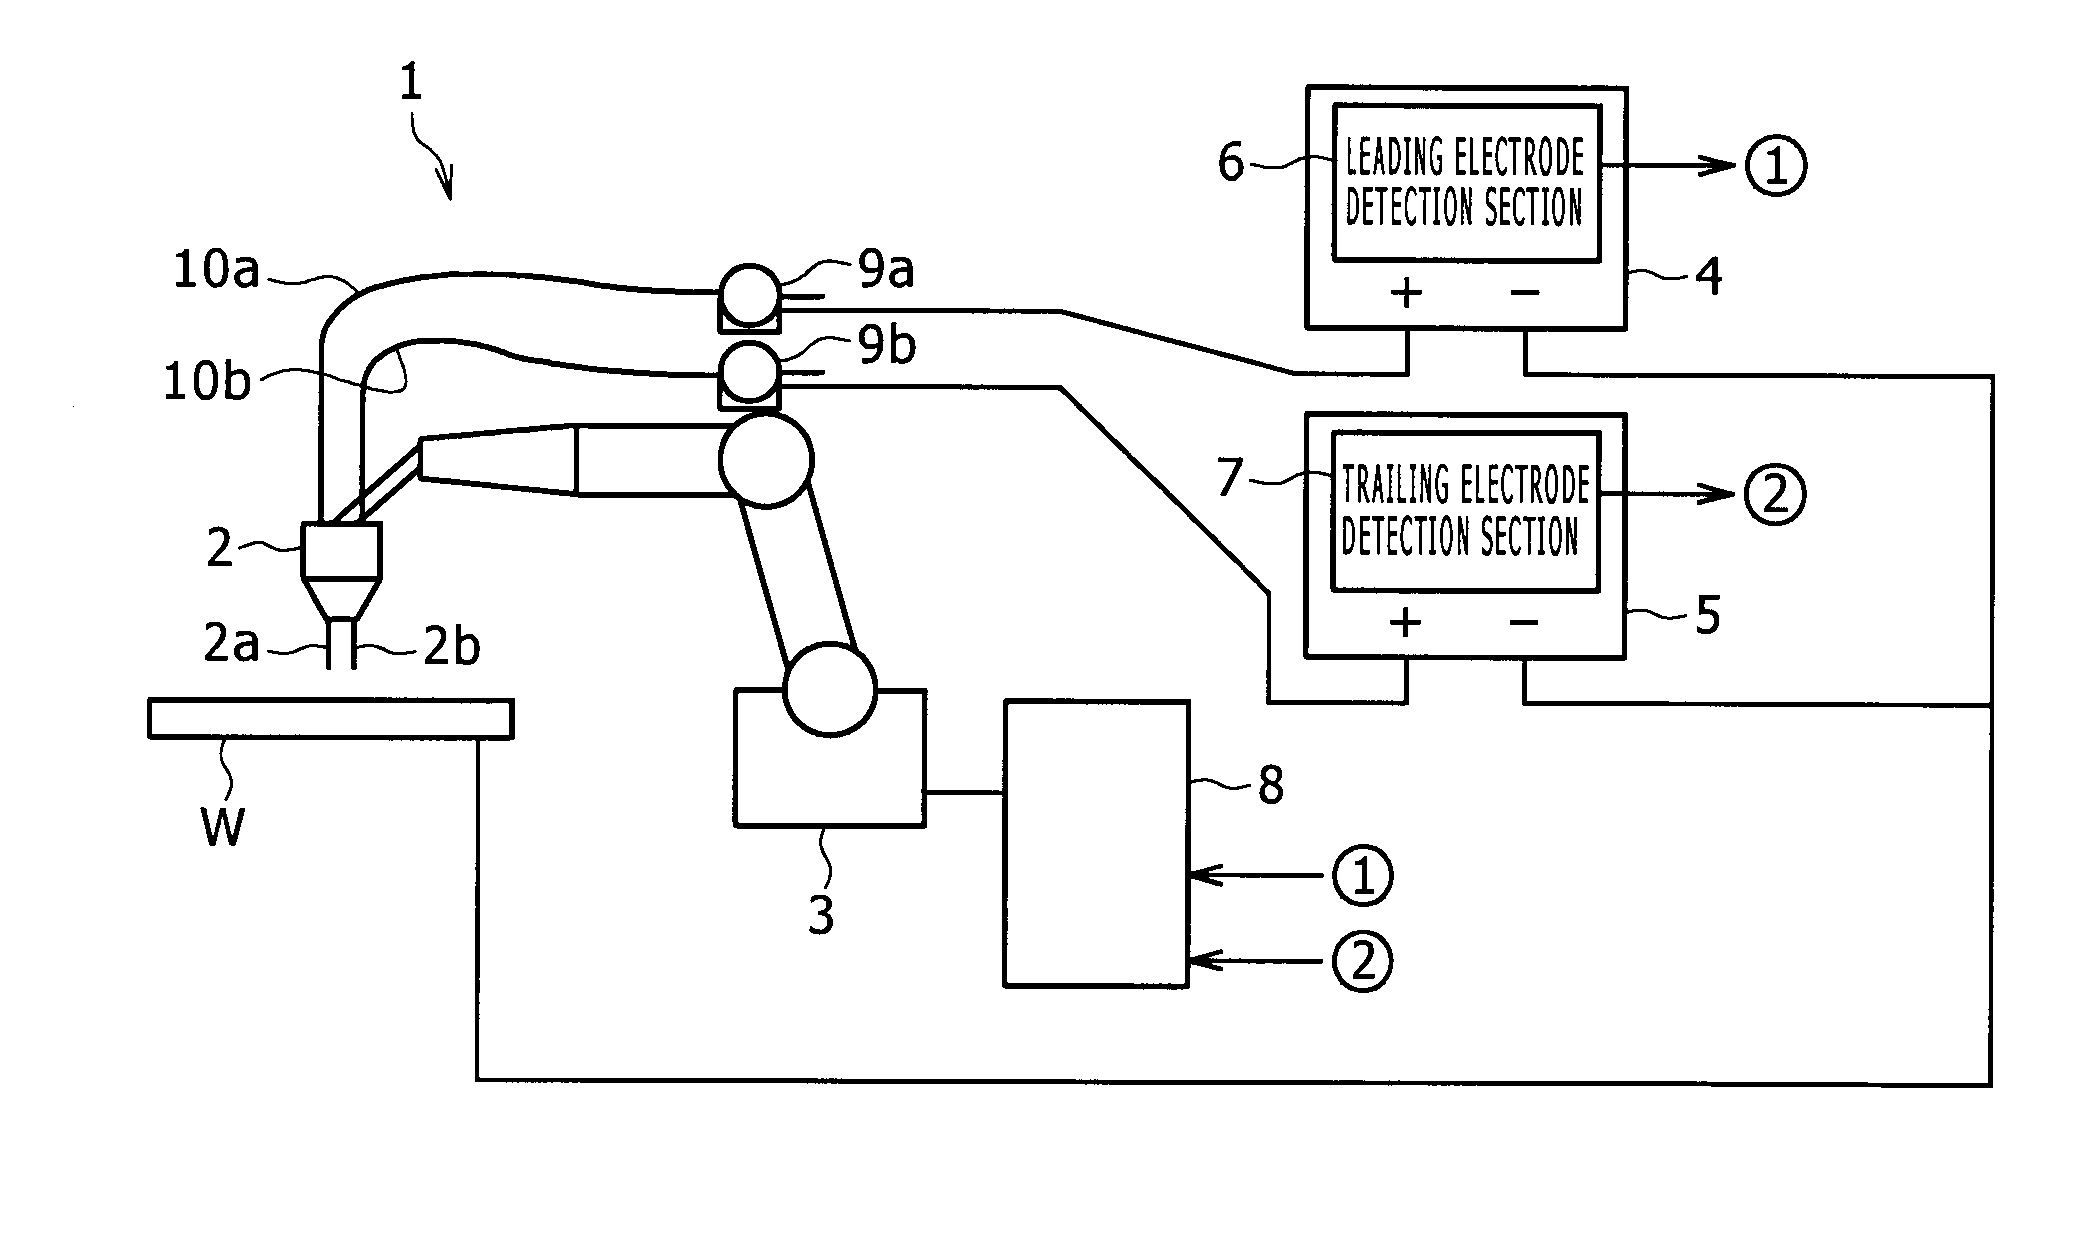 Robot control unit for controlling tandem arc welding system, and arc-sensor control method using the unit